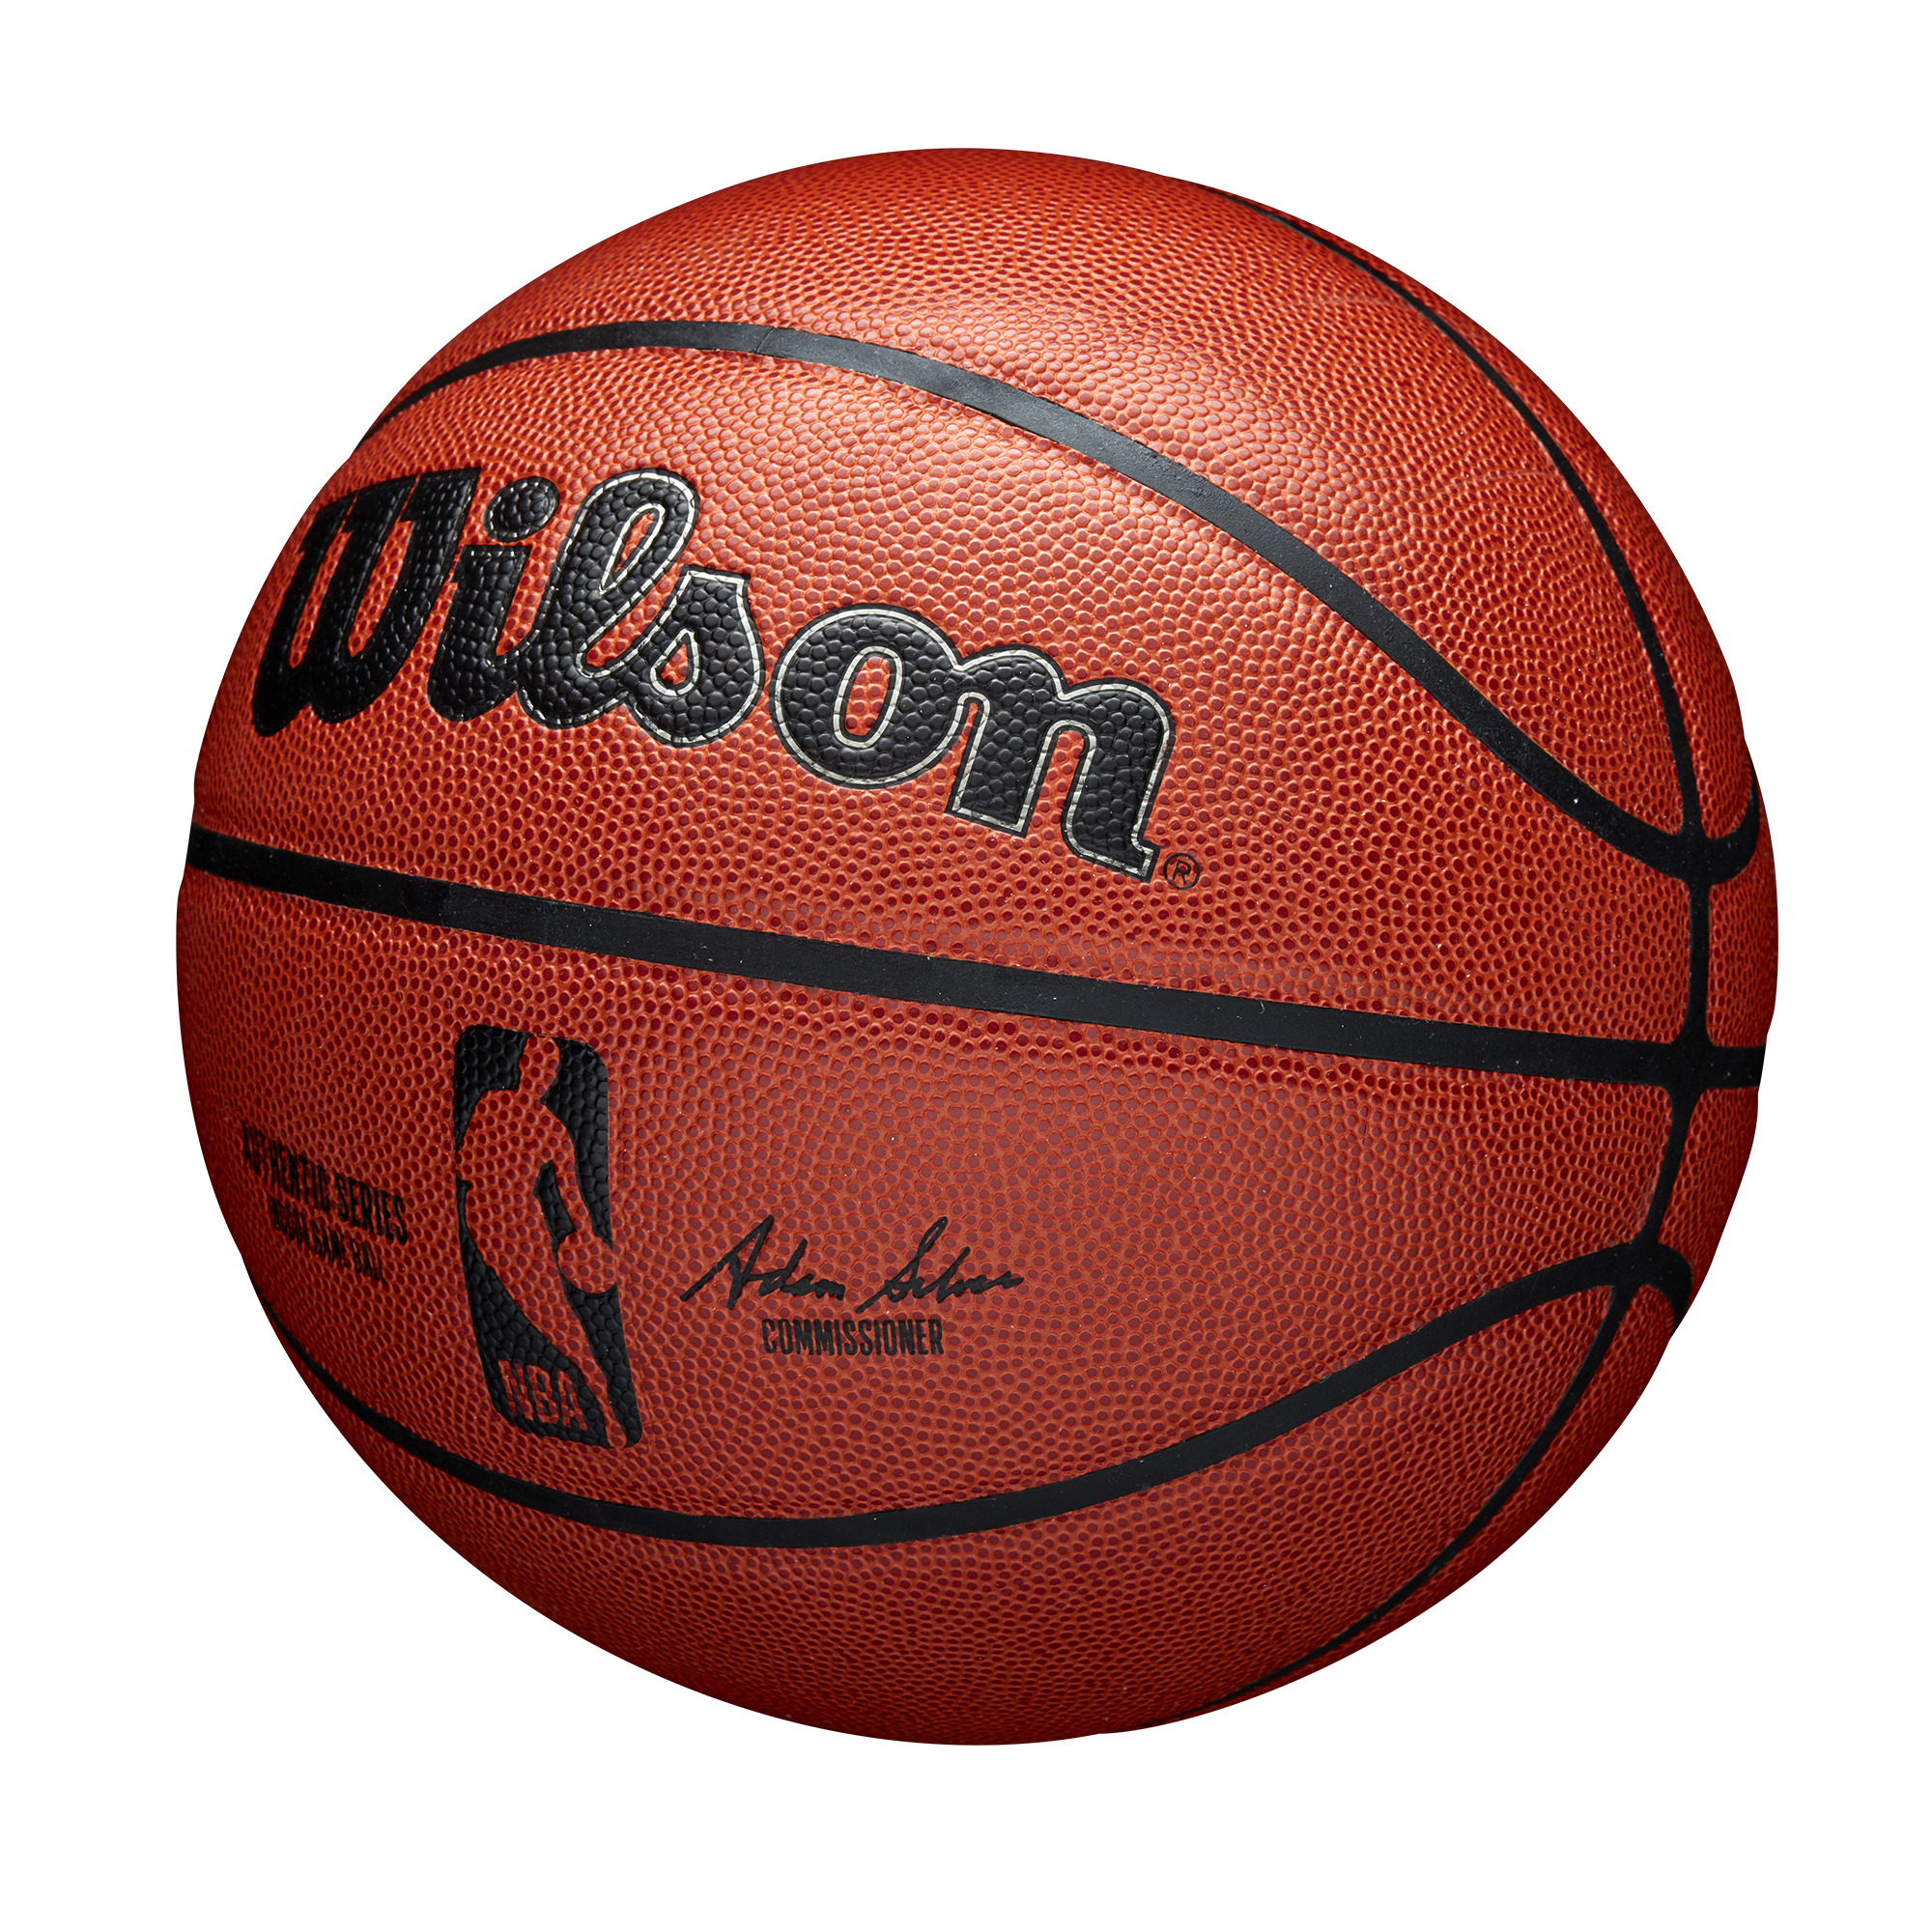 Wilson NBA Authentic Indoor Competition Basketball, Brown, 29.5 in. - image 5 of 6